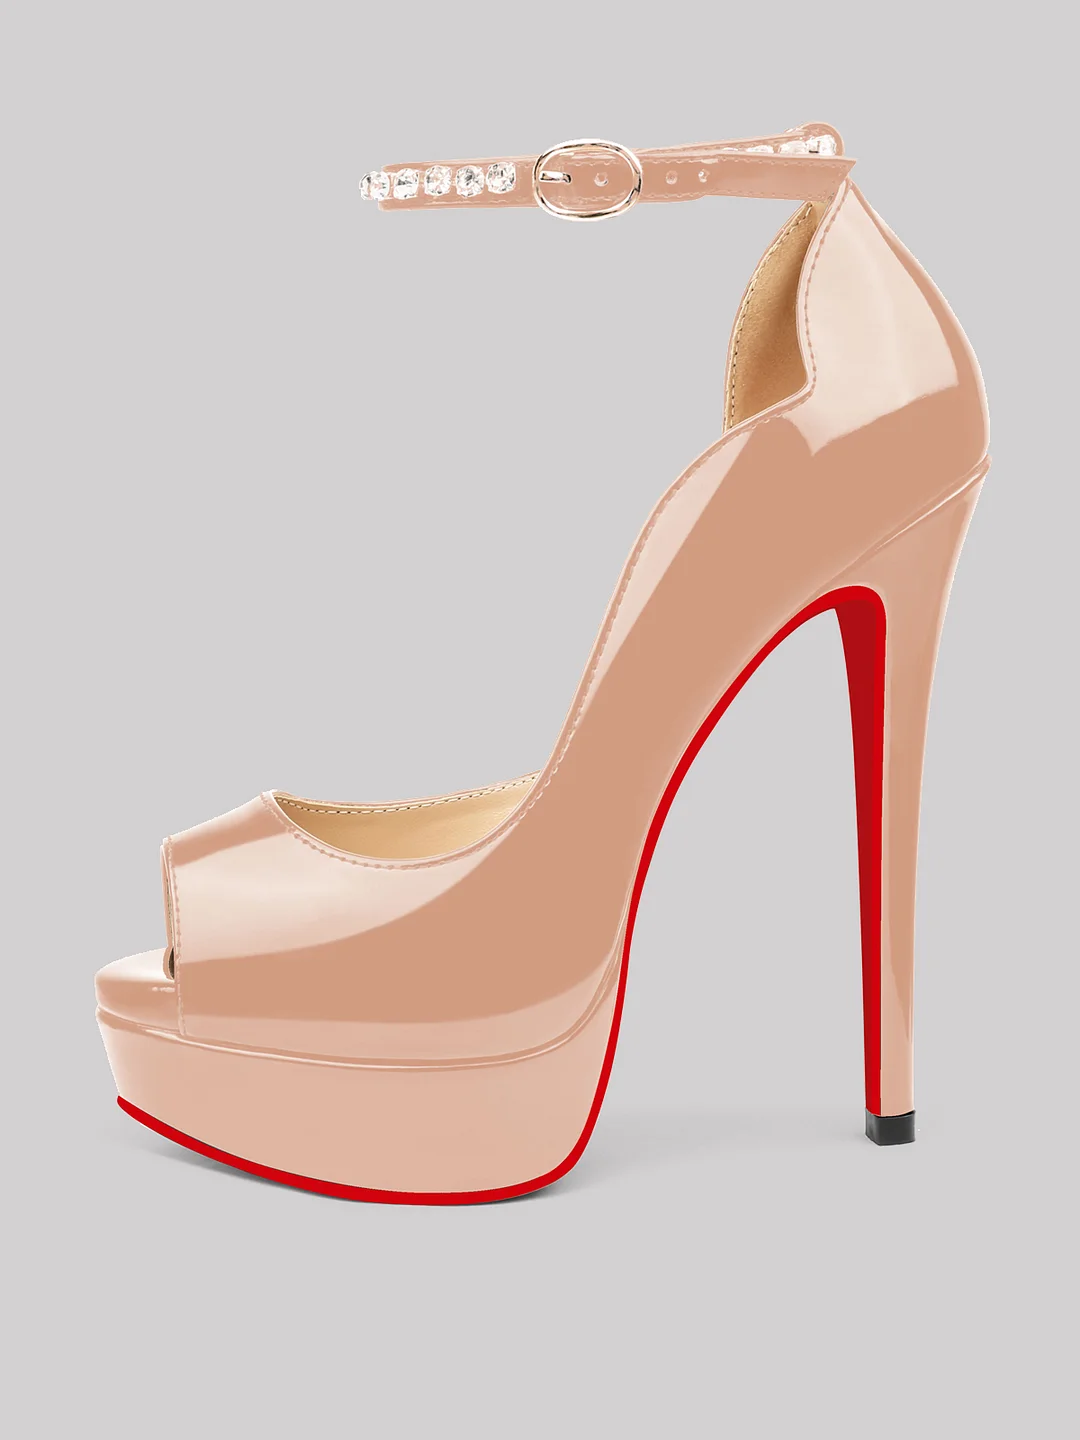 150mm Women's Red Bottom Super High Peep Toe Platform Ankle Strap with Diamond Pumps